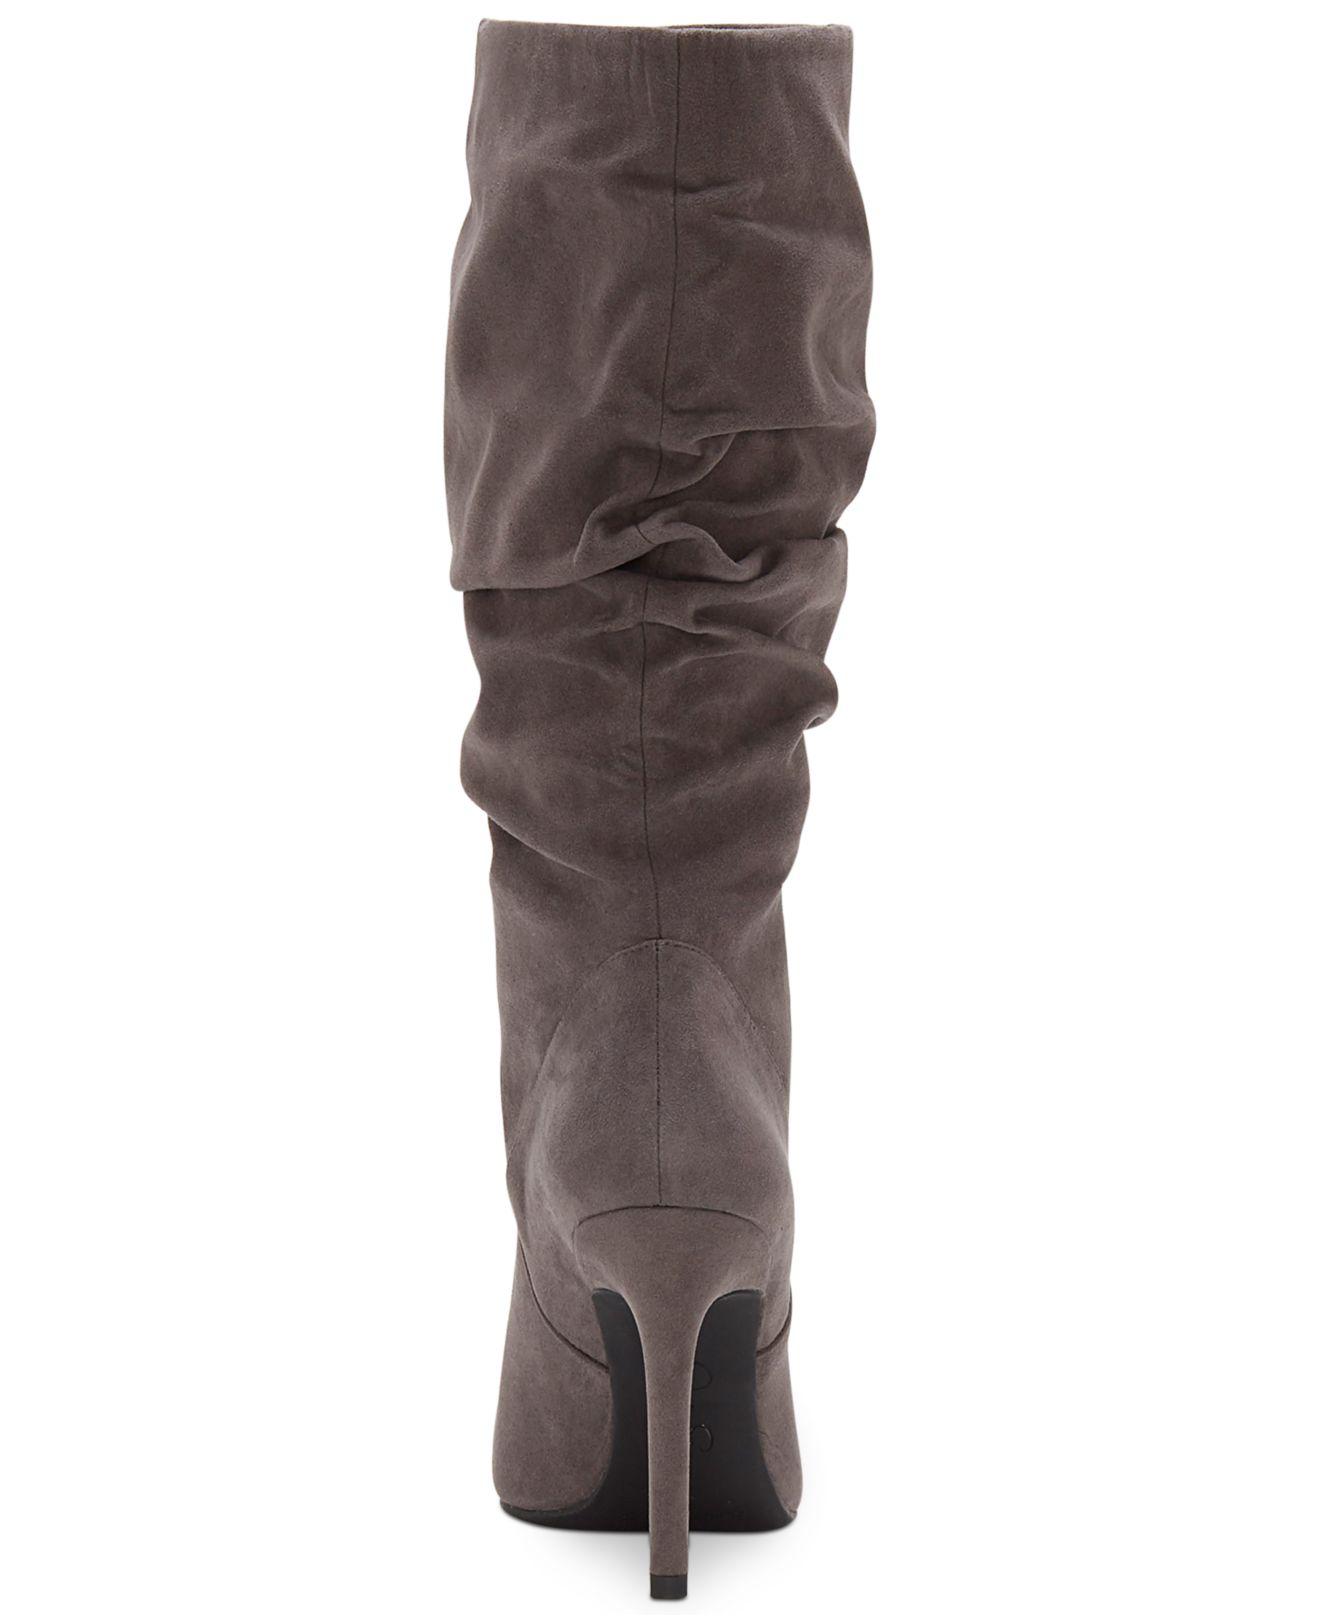 jessica simpson slouch boots